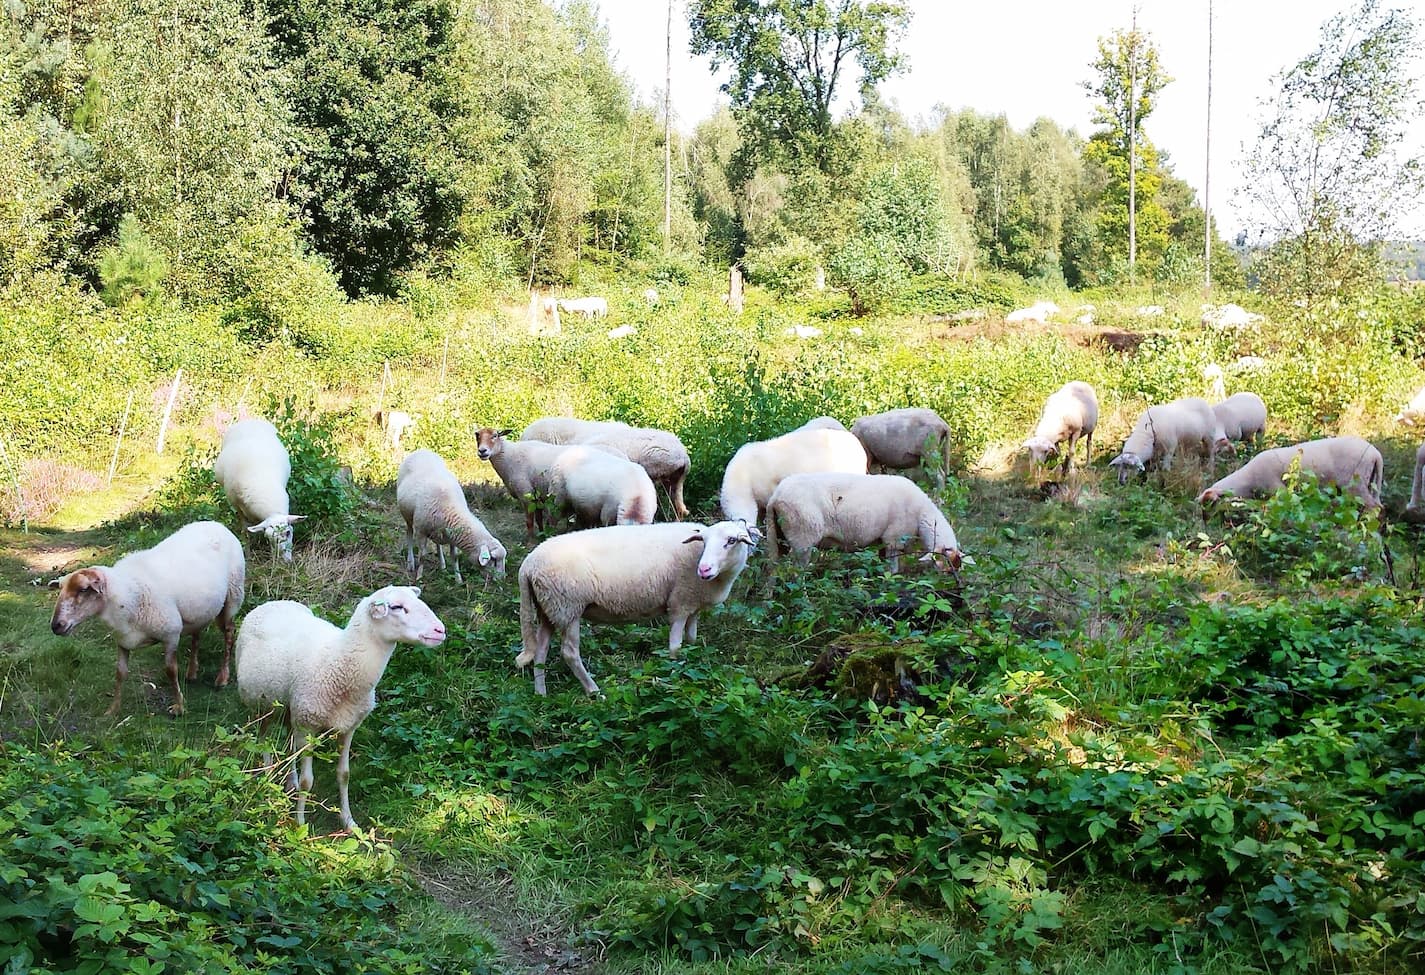 An image of sheeps grazing in the forest.